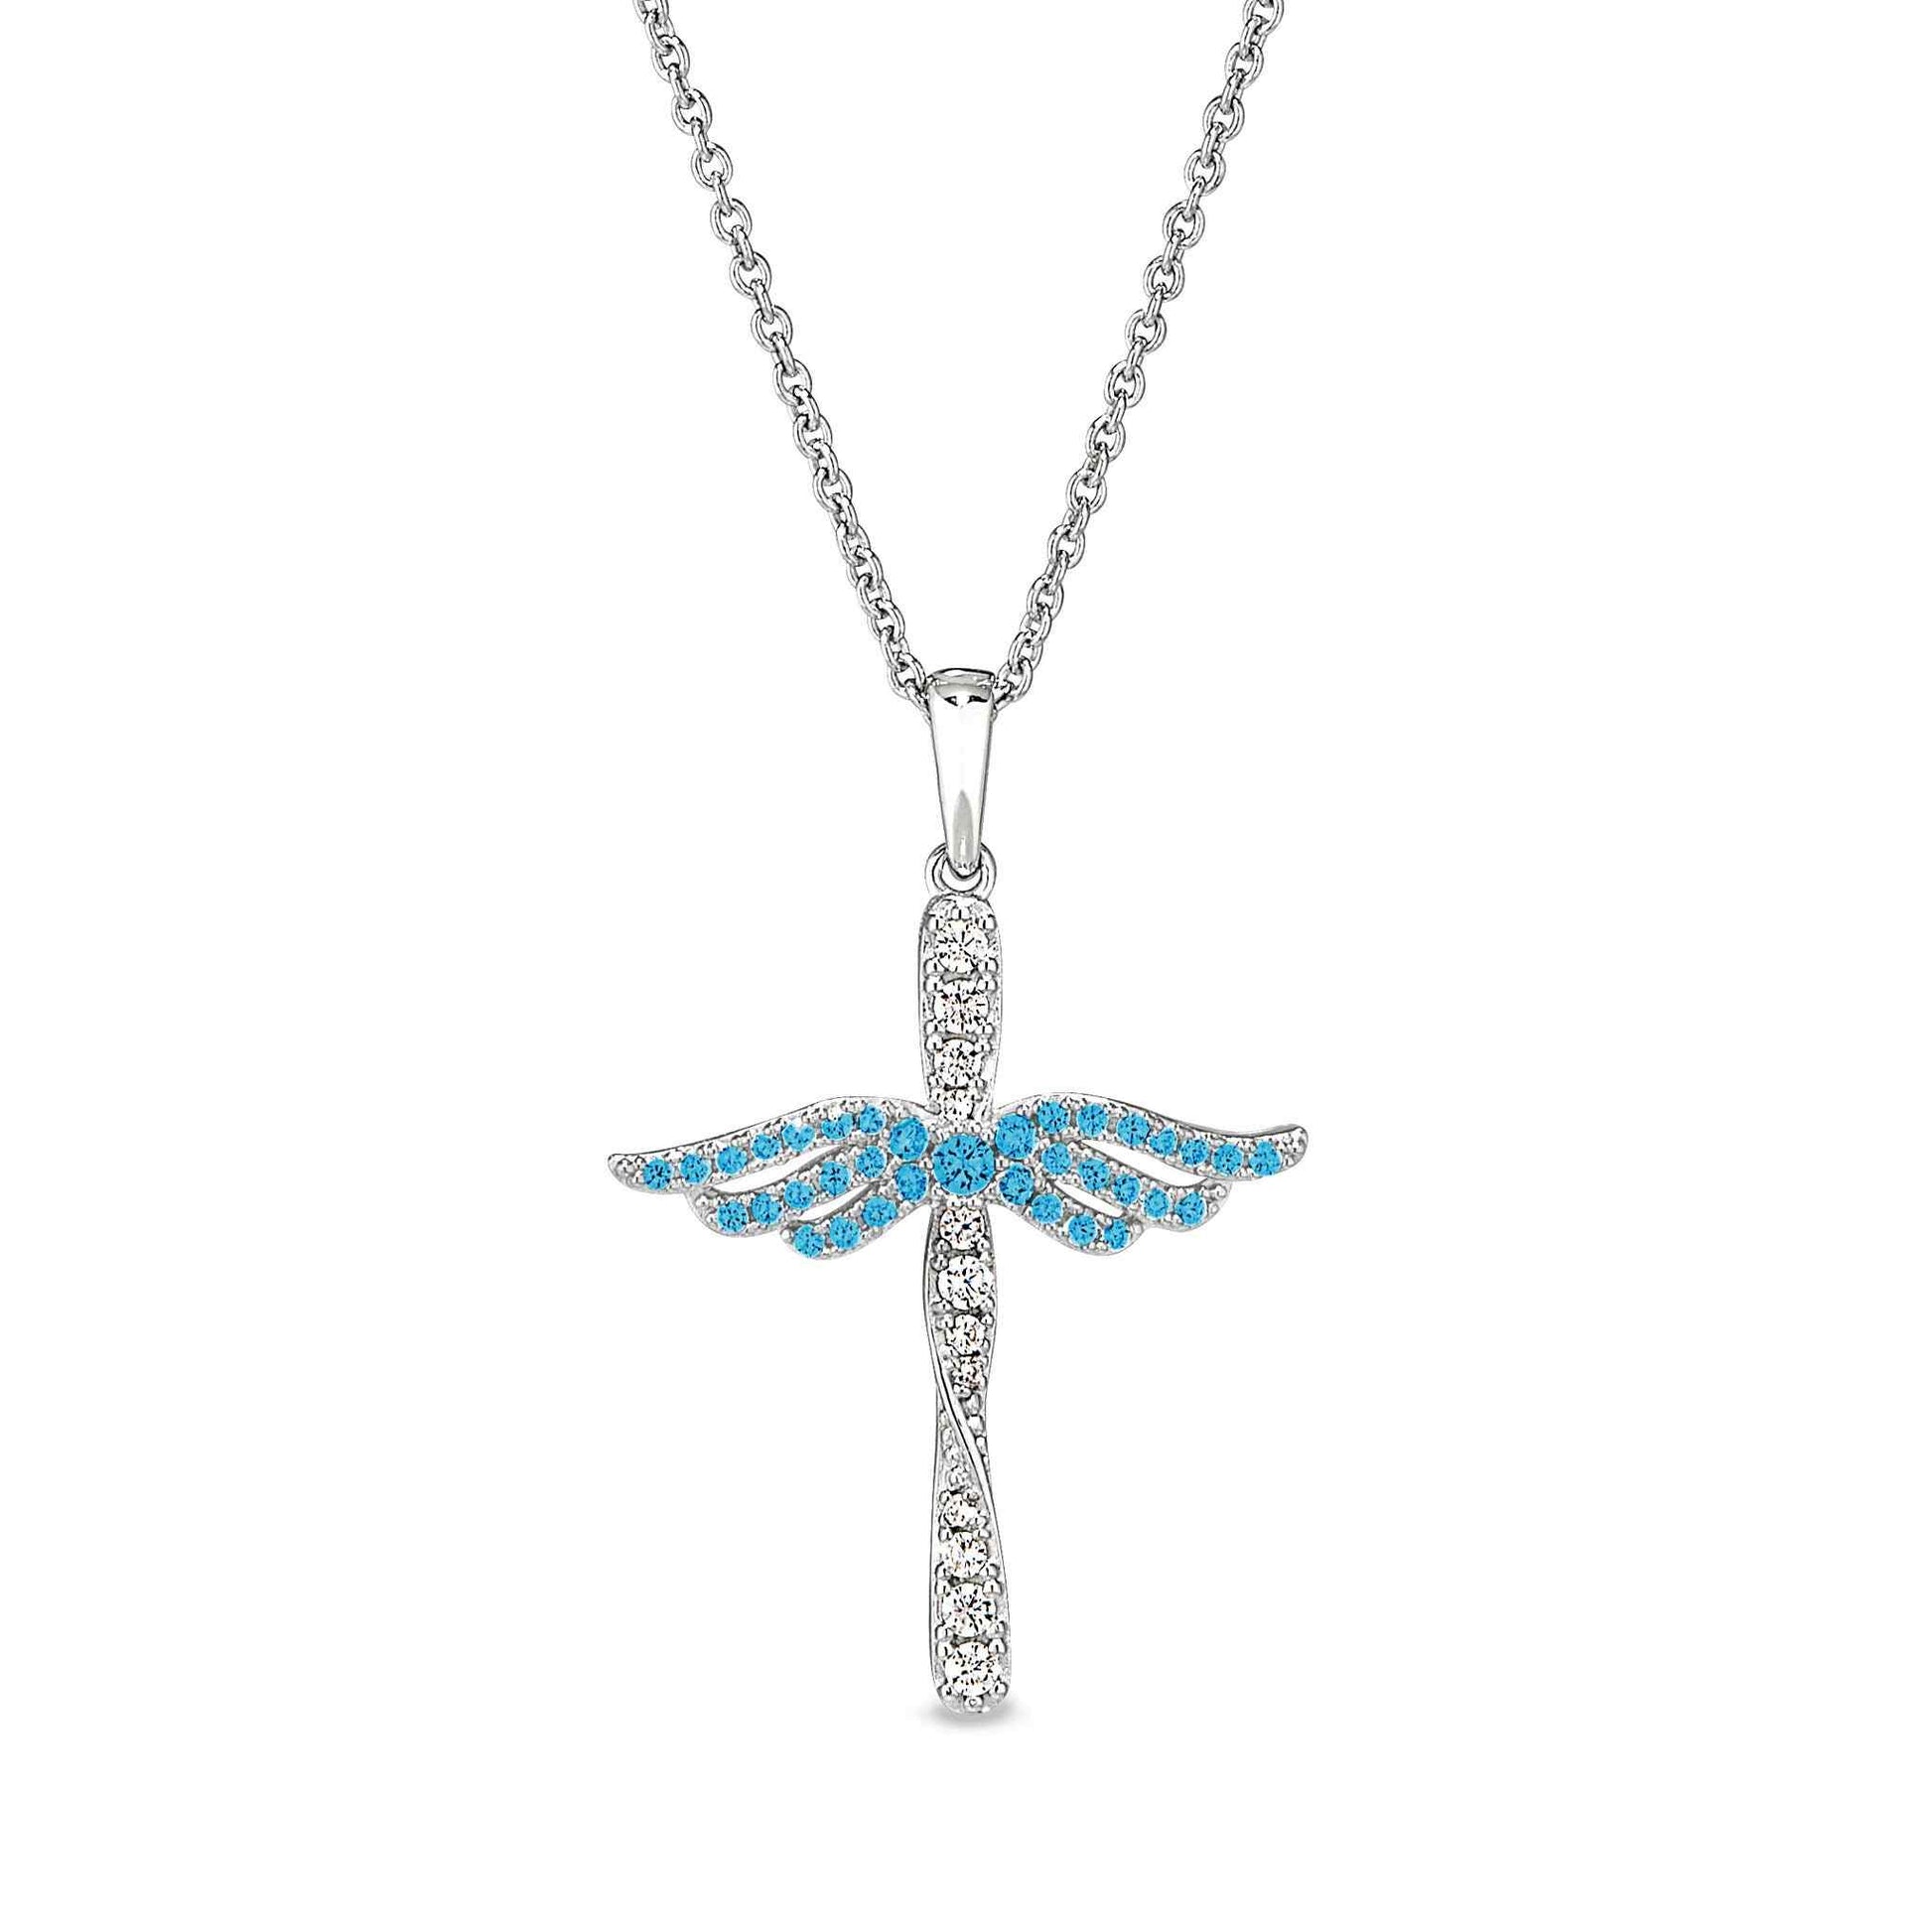 A simulated gemstone & diamonds cross with angel wings displayed on a neutral white background.